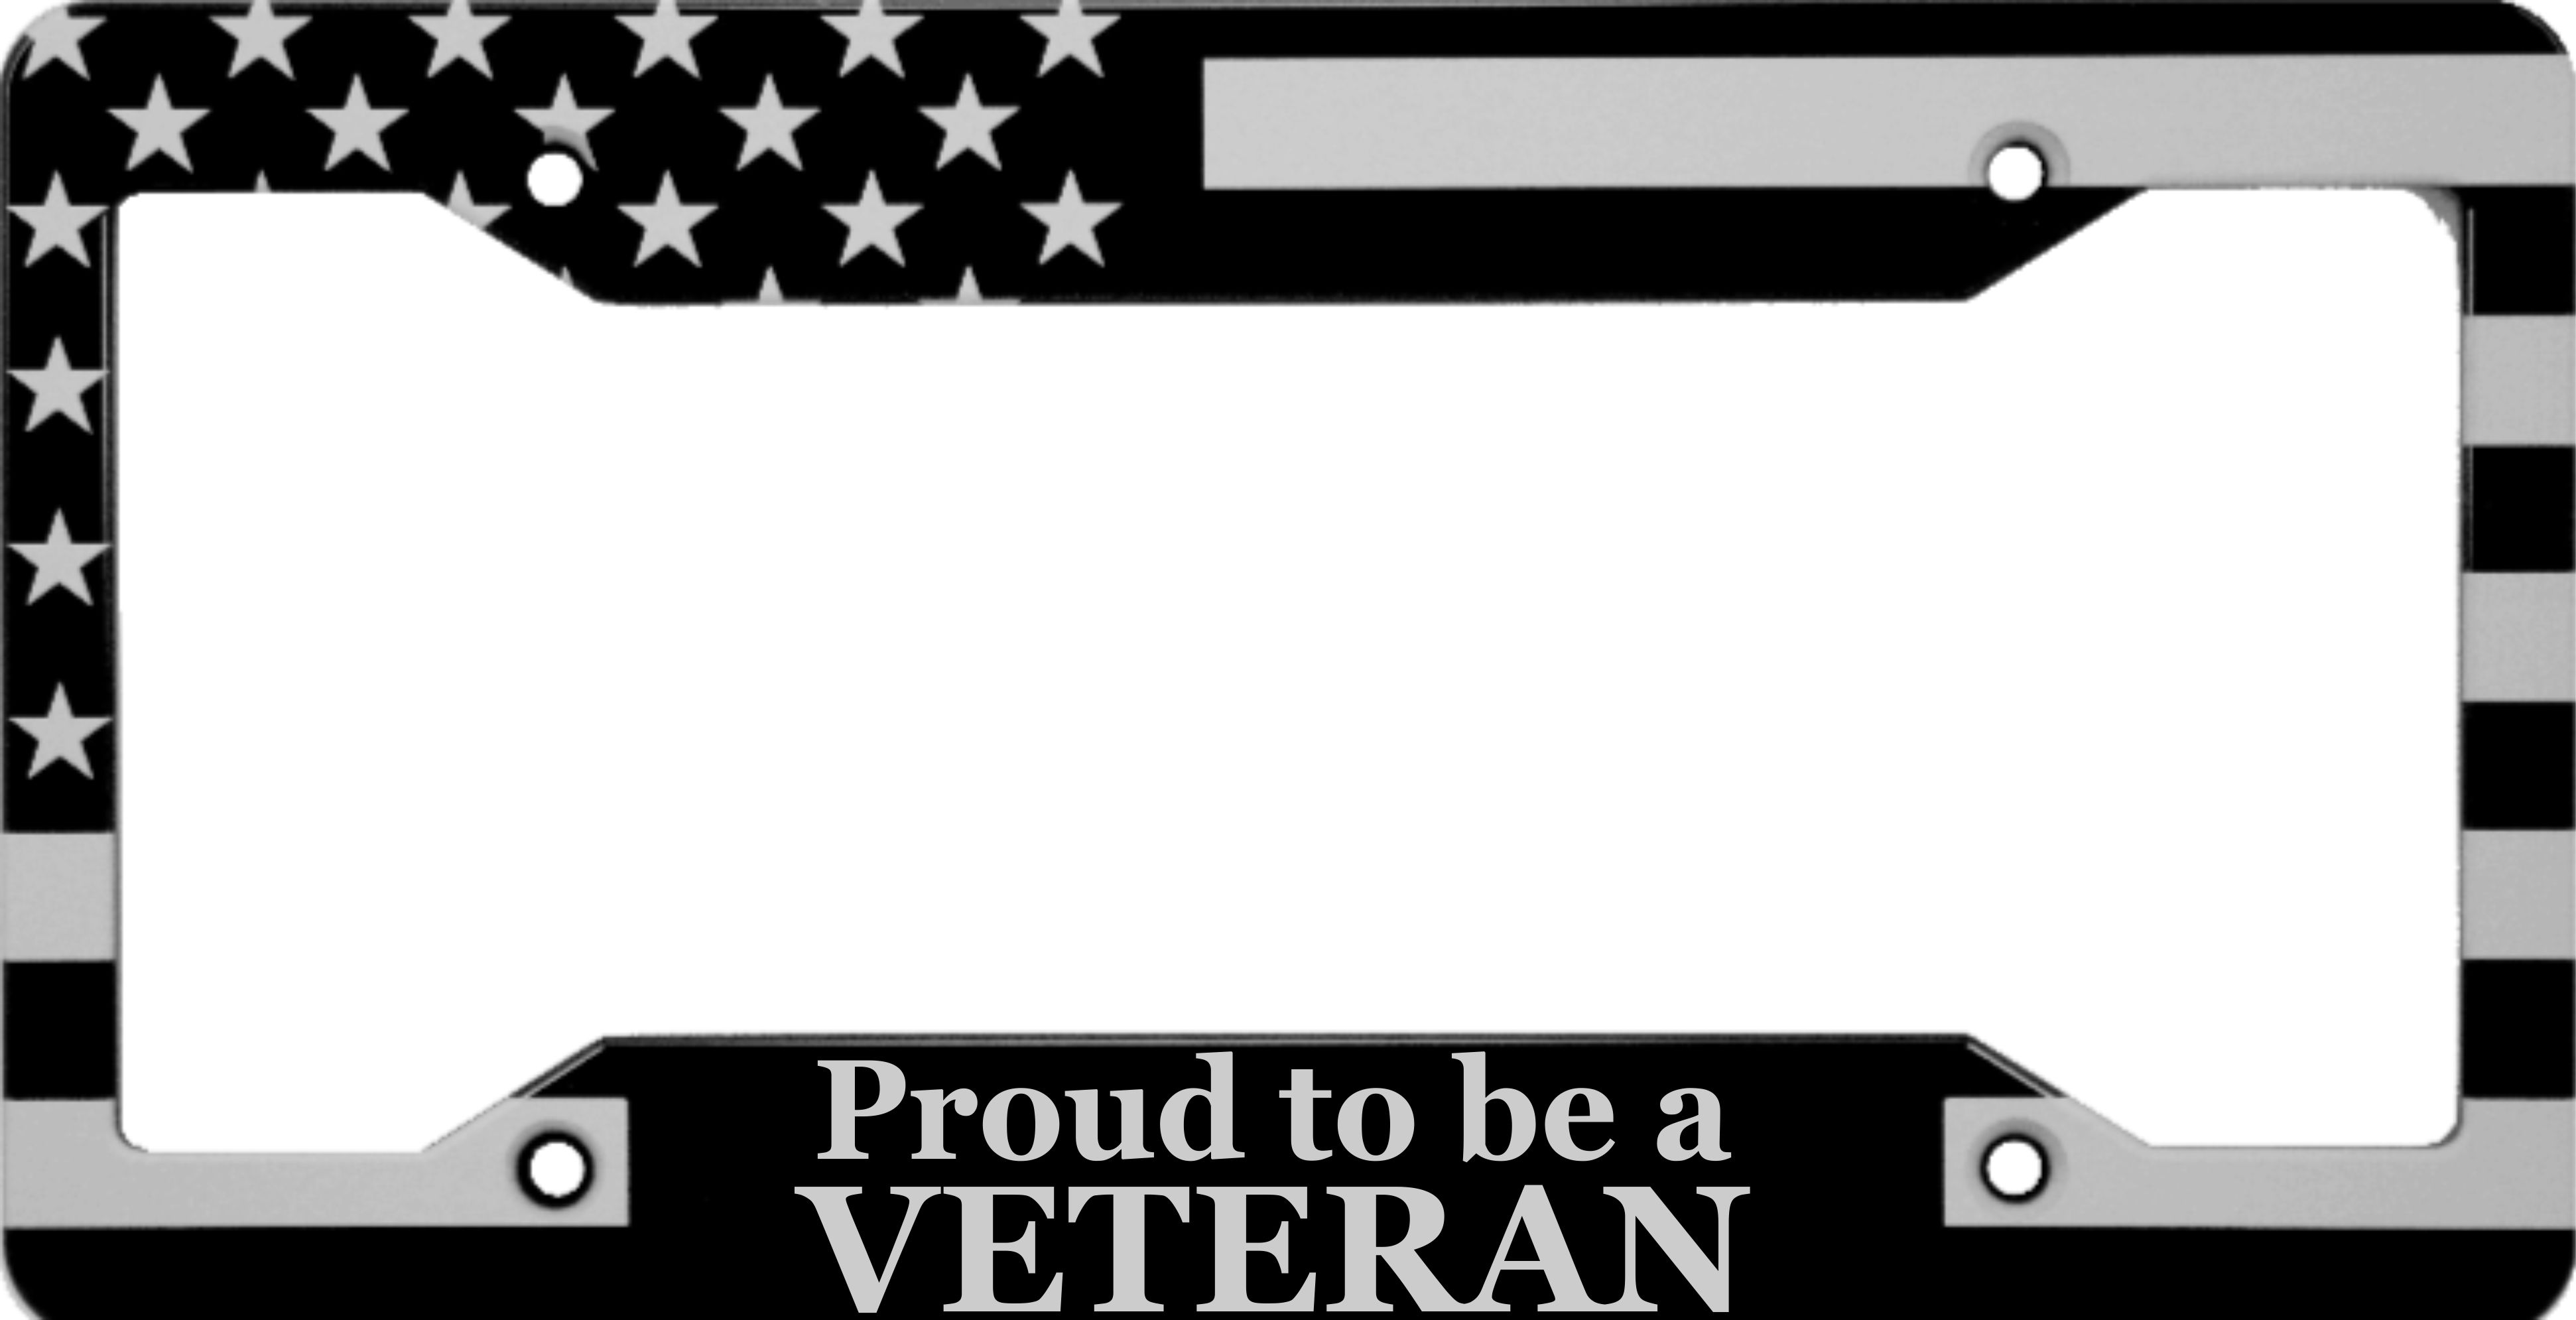 Proud to be a VETERAN - custom license plate frame